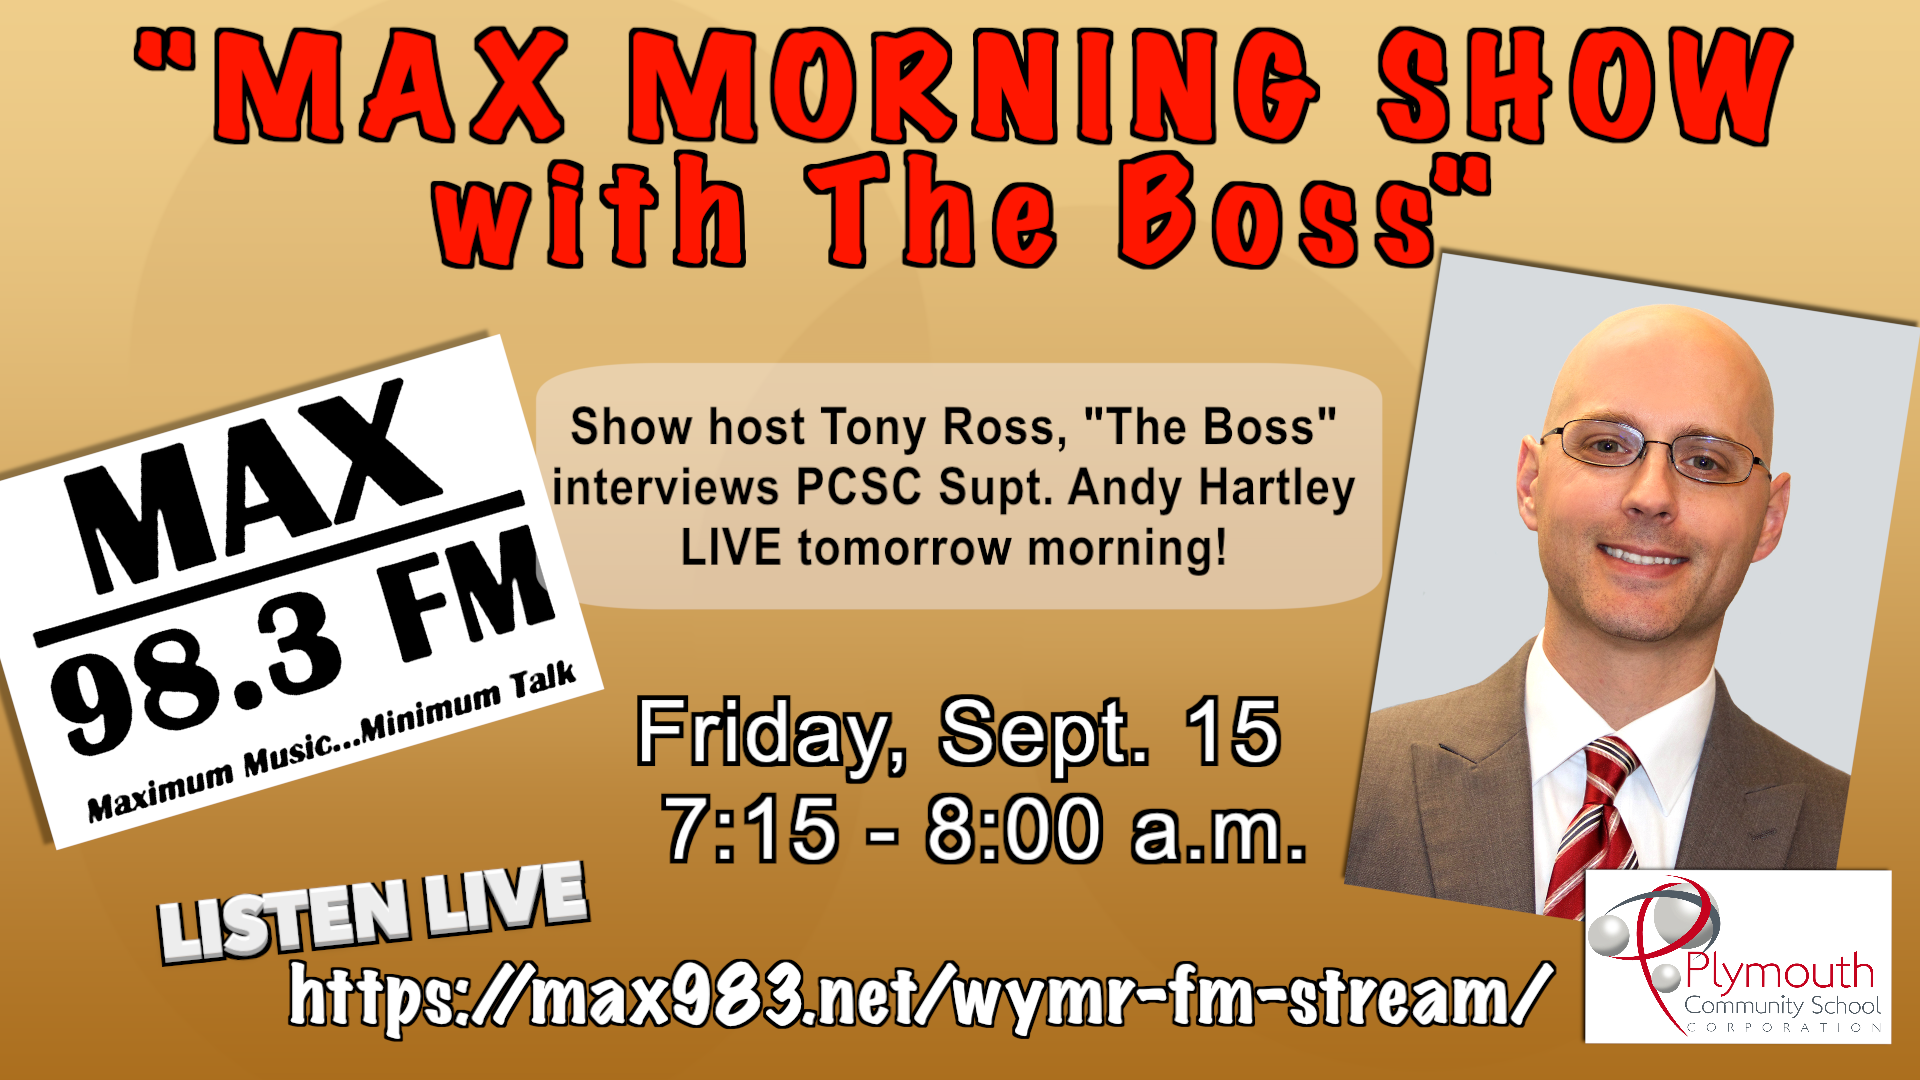 Andy Hartley on Max 98.3 FM on Friday, September 15 from 7:15-8:00 a.m.